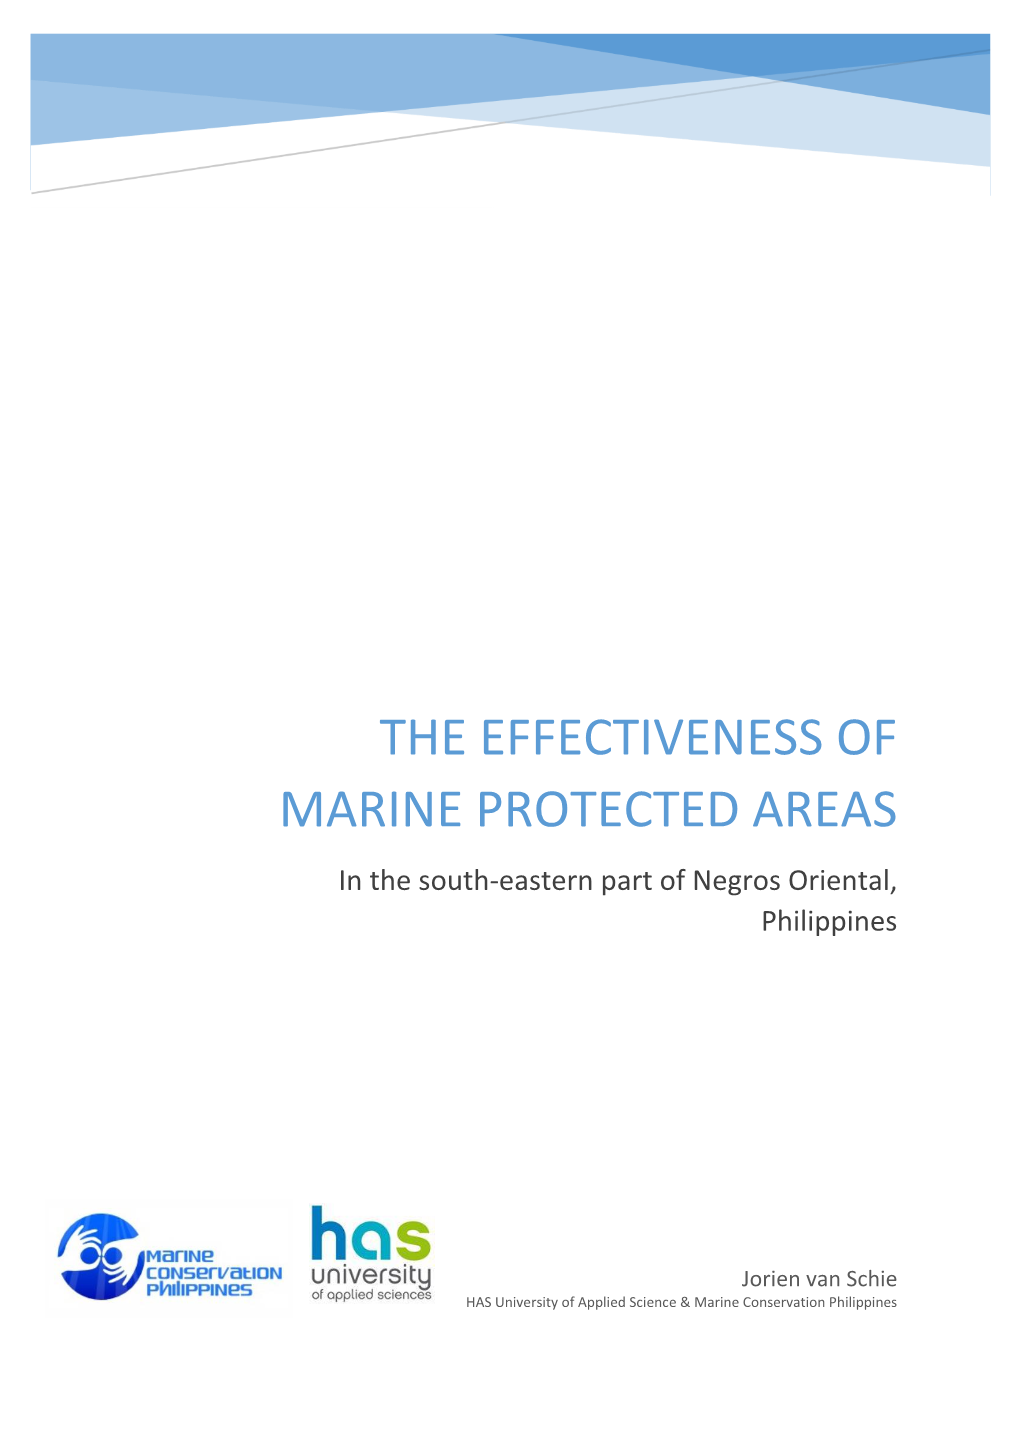 THE EFFECTIVENESS of MARINE PROTECTED AREAS in the South-Eastern Part of Negros Oriental, Philippines